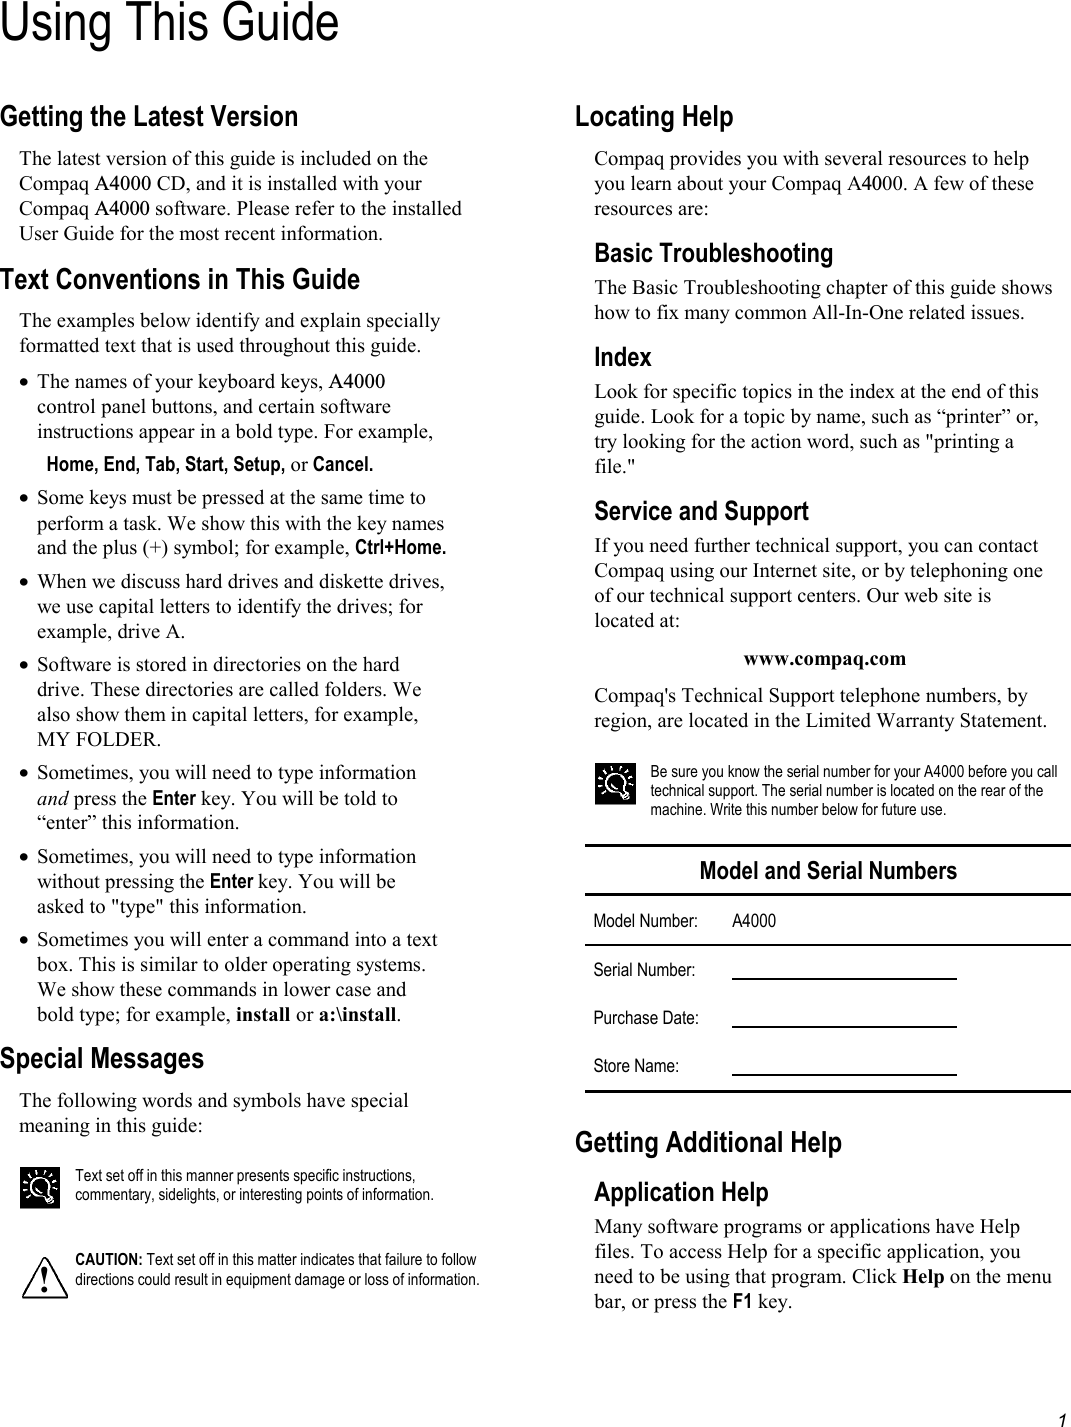   1 Using This GuideGetting the Latest Version The latest version of this guide is included on the Compaq A4000 CD, and it is installed with your Compaq A4000 software. Please refer to the installed User Guide for the most recent information. Text Conventions in This Guide The examples below identify and explain specially formatted text that is used throughout this guide. •  The names of your keyboard keys, A4000 control panel buttons, and certain software instructions appear in a bold type. For example,  Home, End, Tab, Start, Setup, or Cancel. •  Some keys must be pressed at the same time to perform a task. We show this with the key names and the plus (+) symbol; for example, Ctrl+Home.   •  When we discuss hard drives and diskette drives, we use capital letters to identify the drives; for example, drive A. •  Software is stored in directories on the hard drive. These directories are called folders. We also show them in capital letters, for example, MY FOLDER.  •  Sometimes, you will need to type information and press the Enter key. You will be told to “enter” this information. •  Sometimes, you will need to type information without pressing the Enter key. You will be asked to &quot;type&quot; this information. •  Sometimes you will enter a command into a text box. This is similar to older operating systems. We show these commands in lower case and bold type; for example, install or a:\install. Special Messages The following words and symbols have special meaning in this guide:   Text set off in this manner presents specific instructions, commentary, sidelights, or interesting points of information.  ! CAUTION: Text set off in this matter indicates that failure to follow directions could result in equipment damage or loss of information.  Locating Help Compaq provides you with several resources to help you learn about your Compaq A4000. A few of these resources are:  Basic Troubleshooting The Basic Troubleshooting chapter of this guide shows how to fix many common All-In-One related issues.  Index Look for specific topics in the index at the end of this guide. Look for a topic by name, such as “printer” or, try looking for the action word, such as &quot;printing a file.&quot; Service and Support If you need further technical support, you can contact Compaq using our Internet site, or by telephoning one of our technical support centers. Our web site is located at: www.compaq.com Compaq&apos;s Technical Support telephone numbers, by region, are located in the Limited Warranty Statement.   Be sure you know the serial number for your A4000 before you call technical support. The serial number is located on the rear of the machine. Write this number below for future use.  Model and Serial Numbers Model Number: A4000 Serial Number:       Purchase Date:       Store Name:        Getting Additional Help Application Help Many software programs or applications have Help files. To access Help for a specific application, you need to be using that program. Click Help on the menu bar, or press the F1 key. 